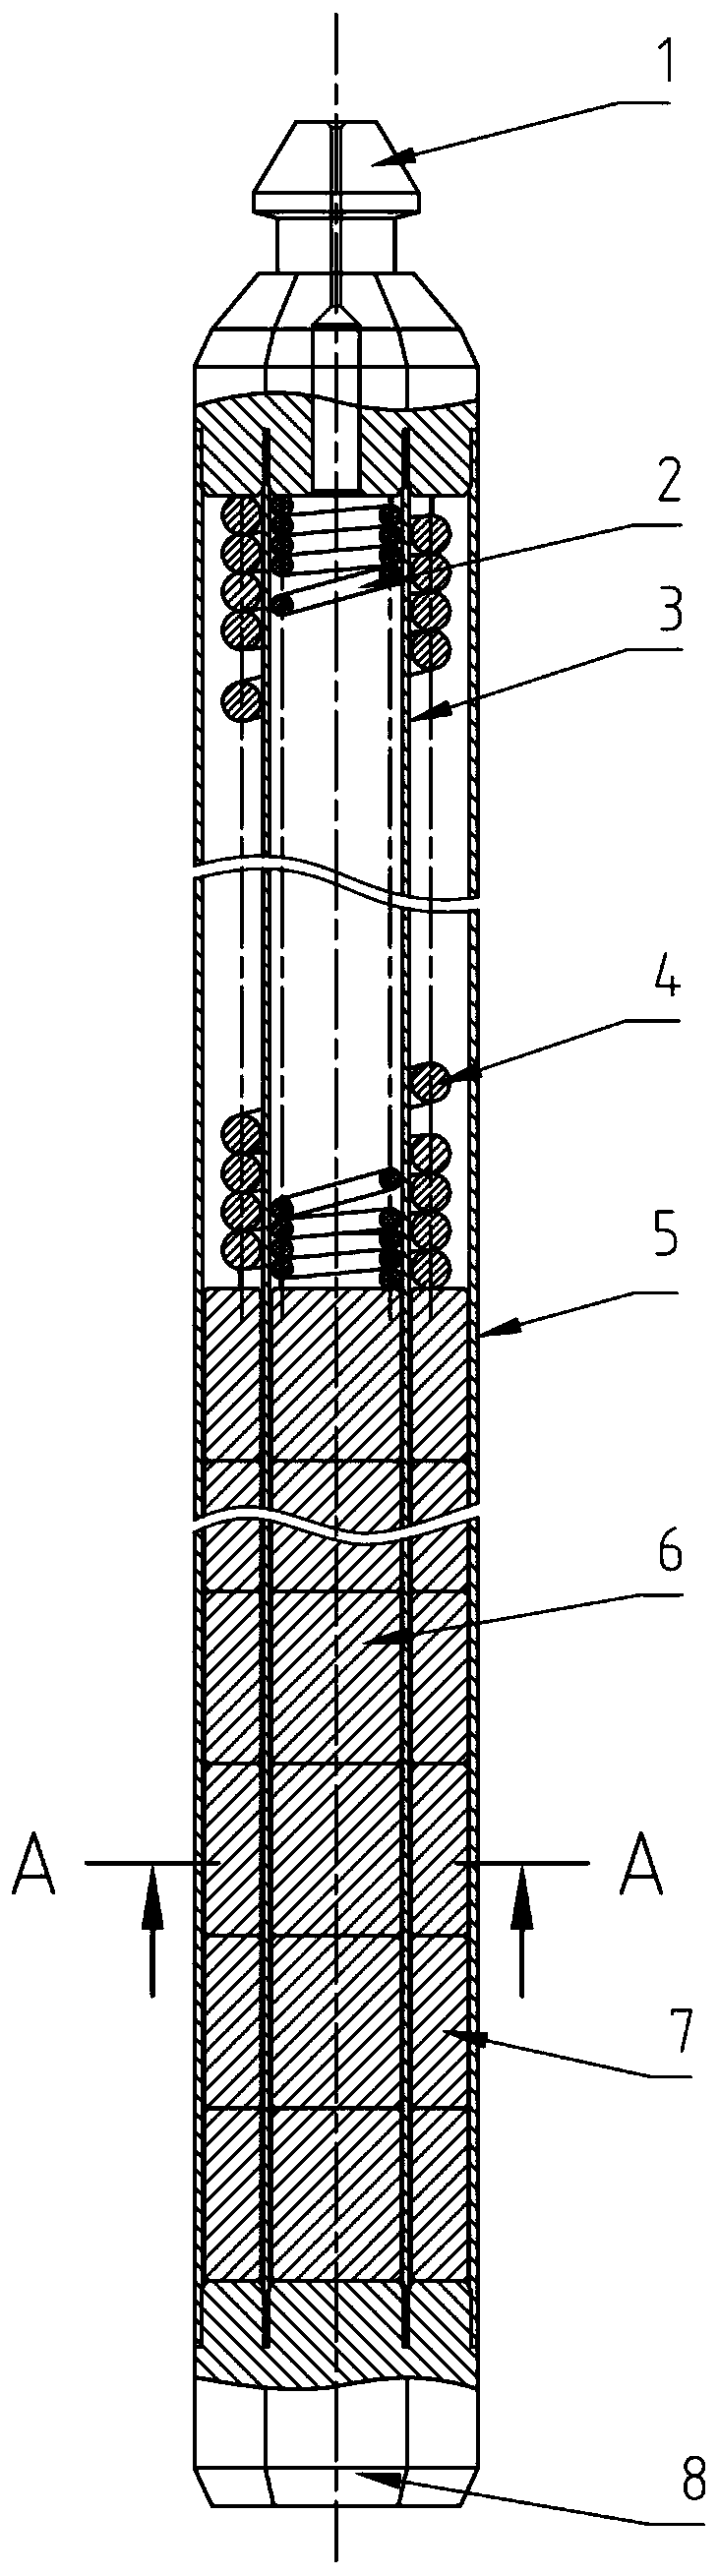 A dual-cladding fuel element with enhanced moderating power